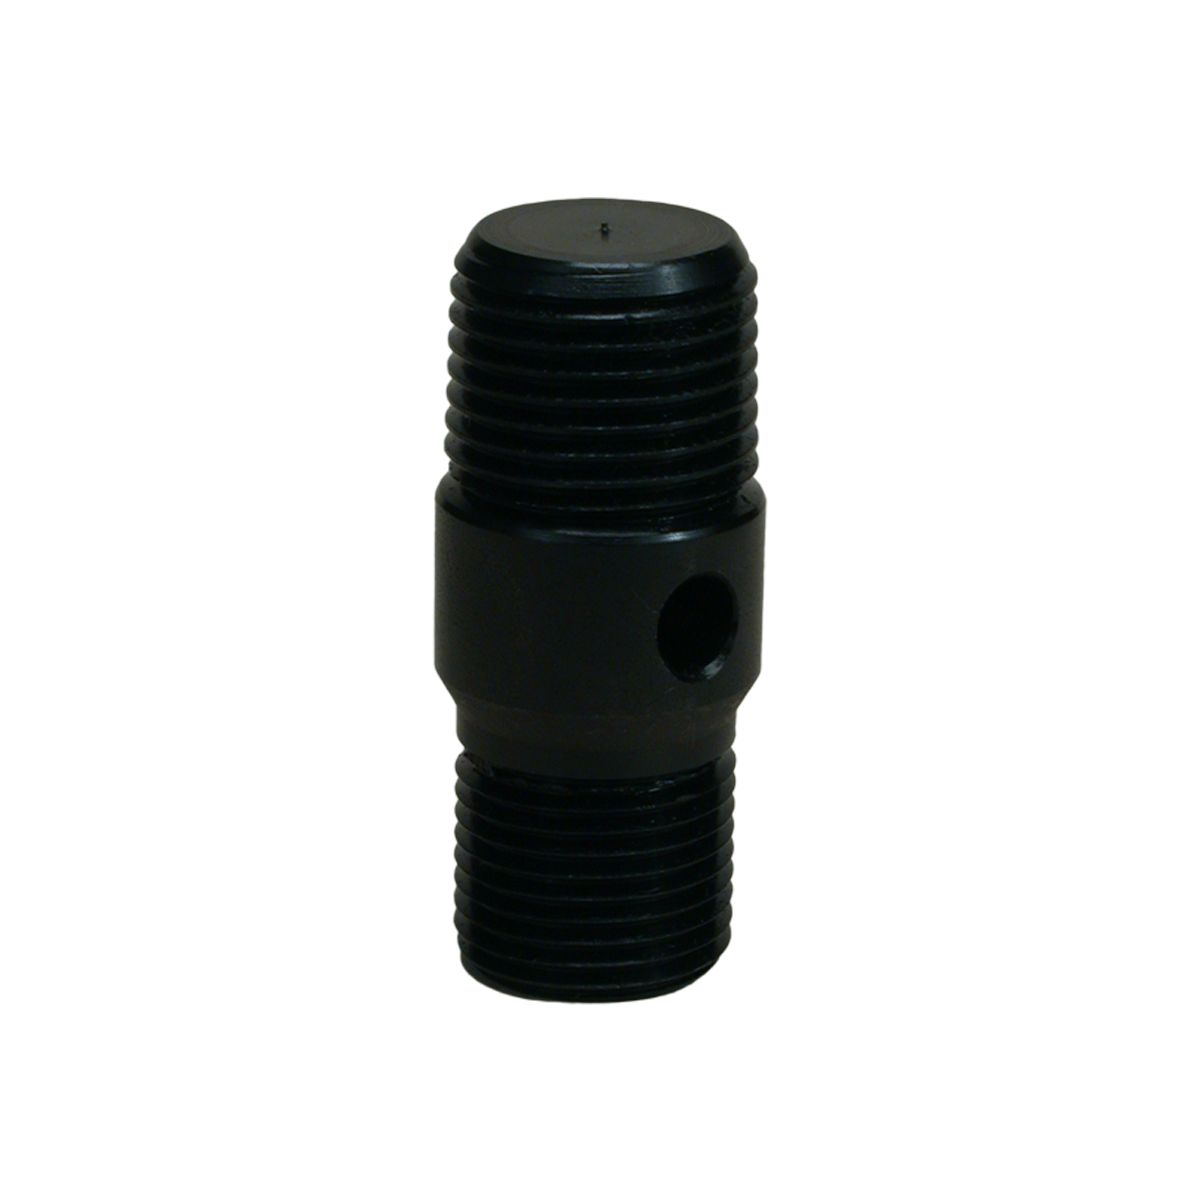 Threaded Adapters